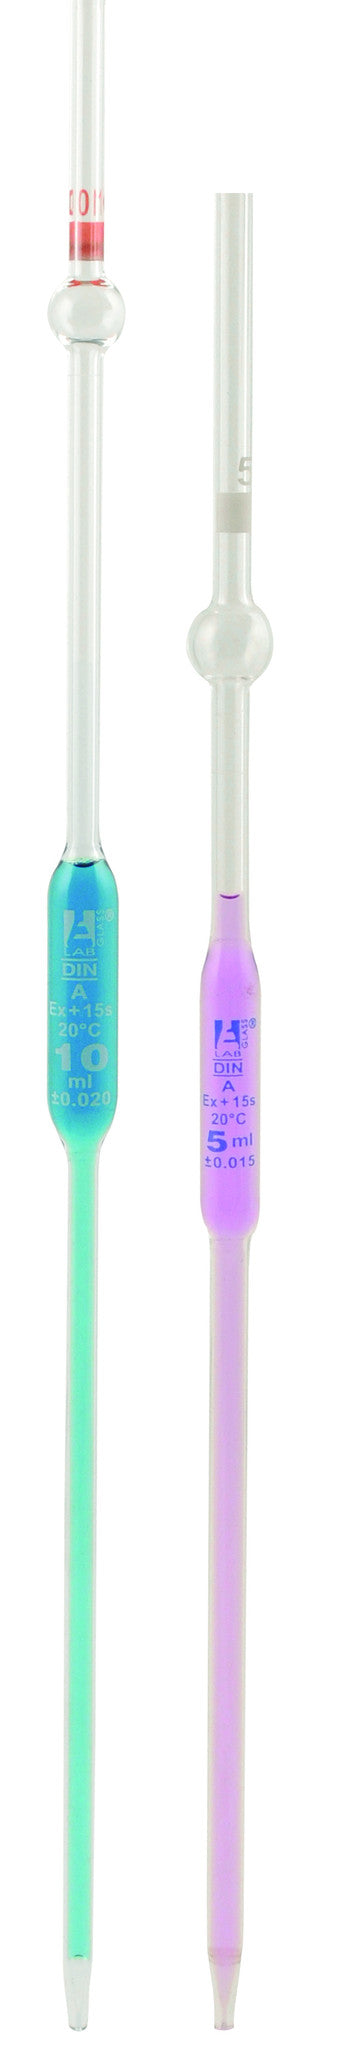 Pipette class 'B' with safety bulb, 2ml